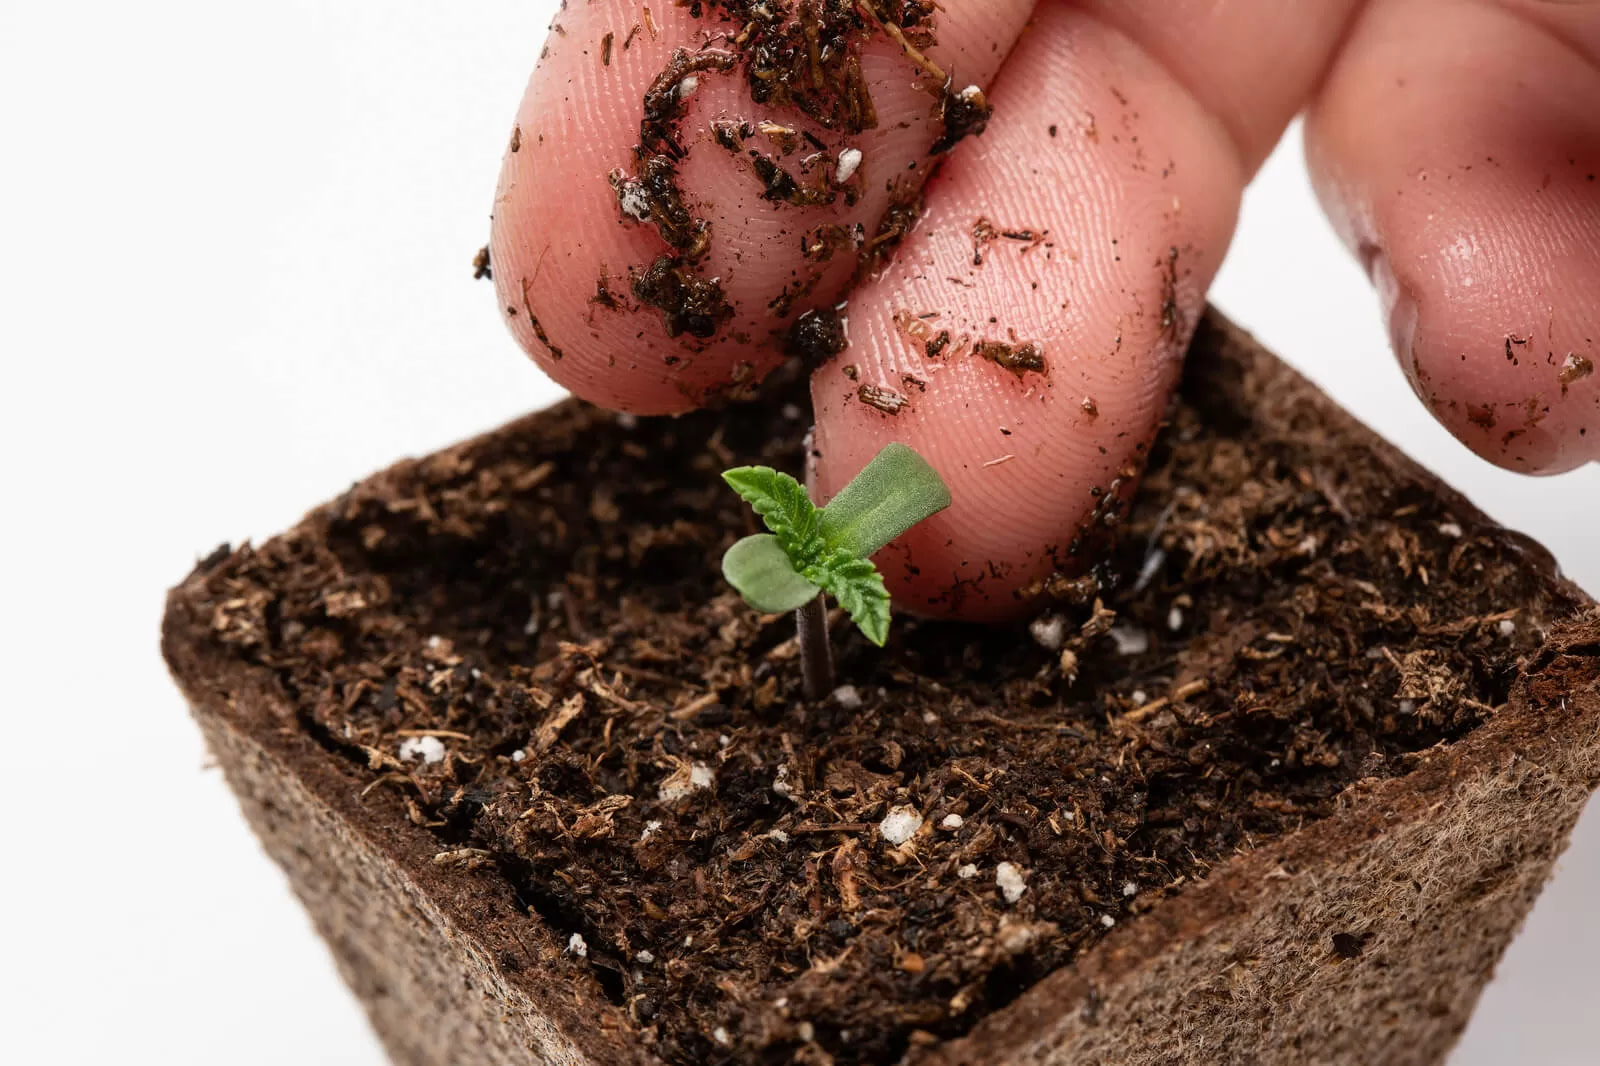 How To Care For Cannabis Seedlings